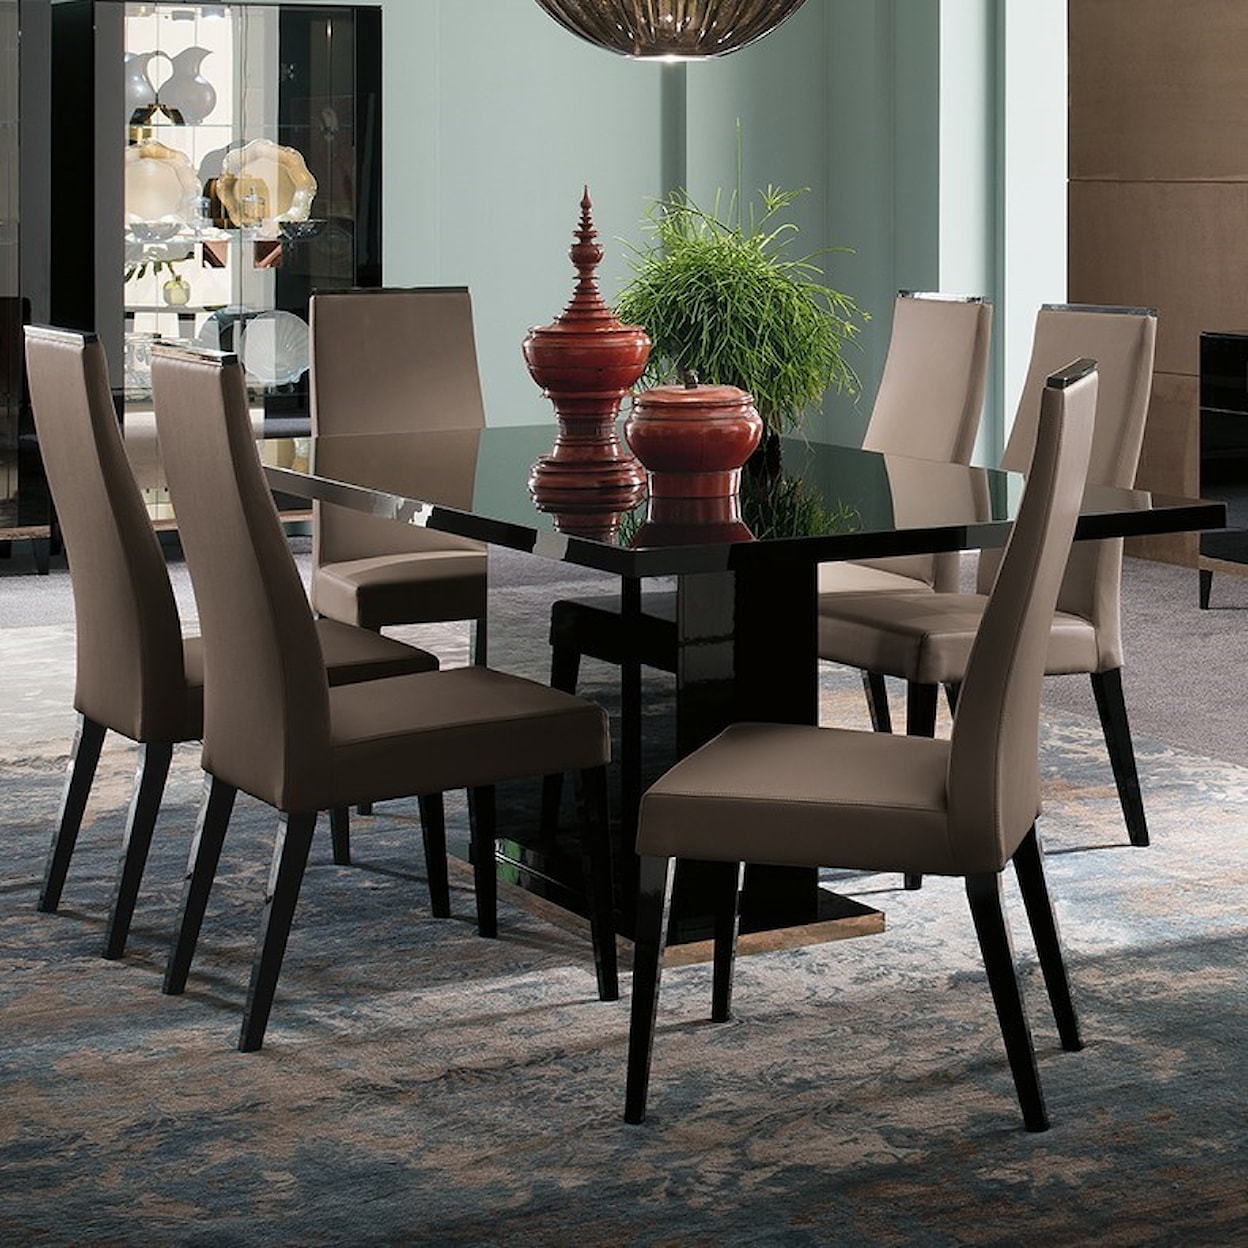 Alf Italia Mont Noir Dining Table and Chair Set